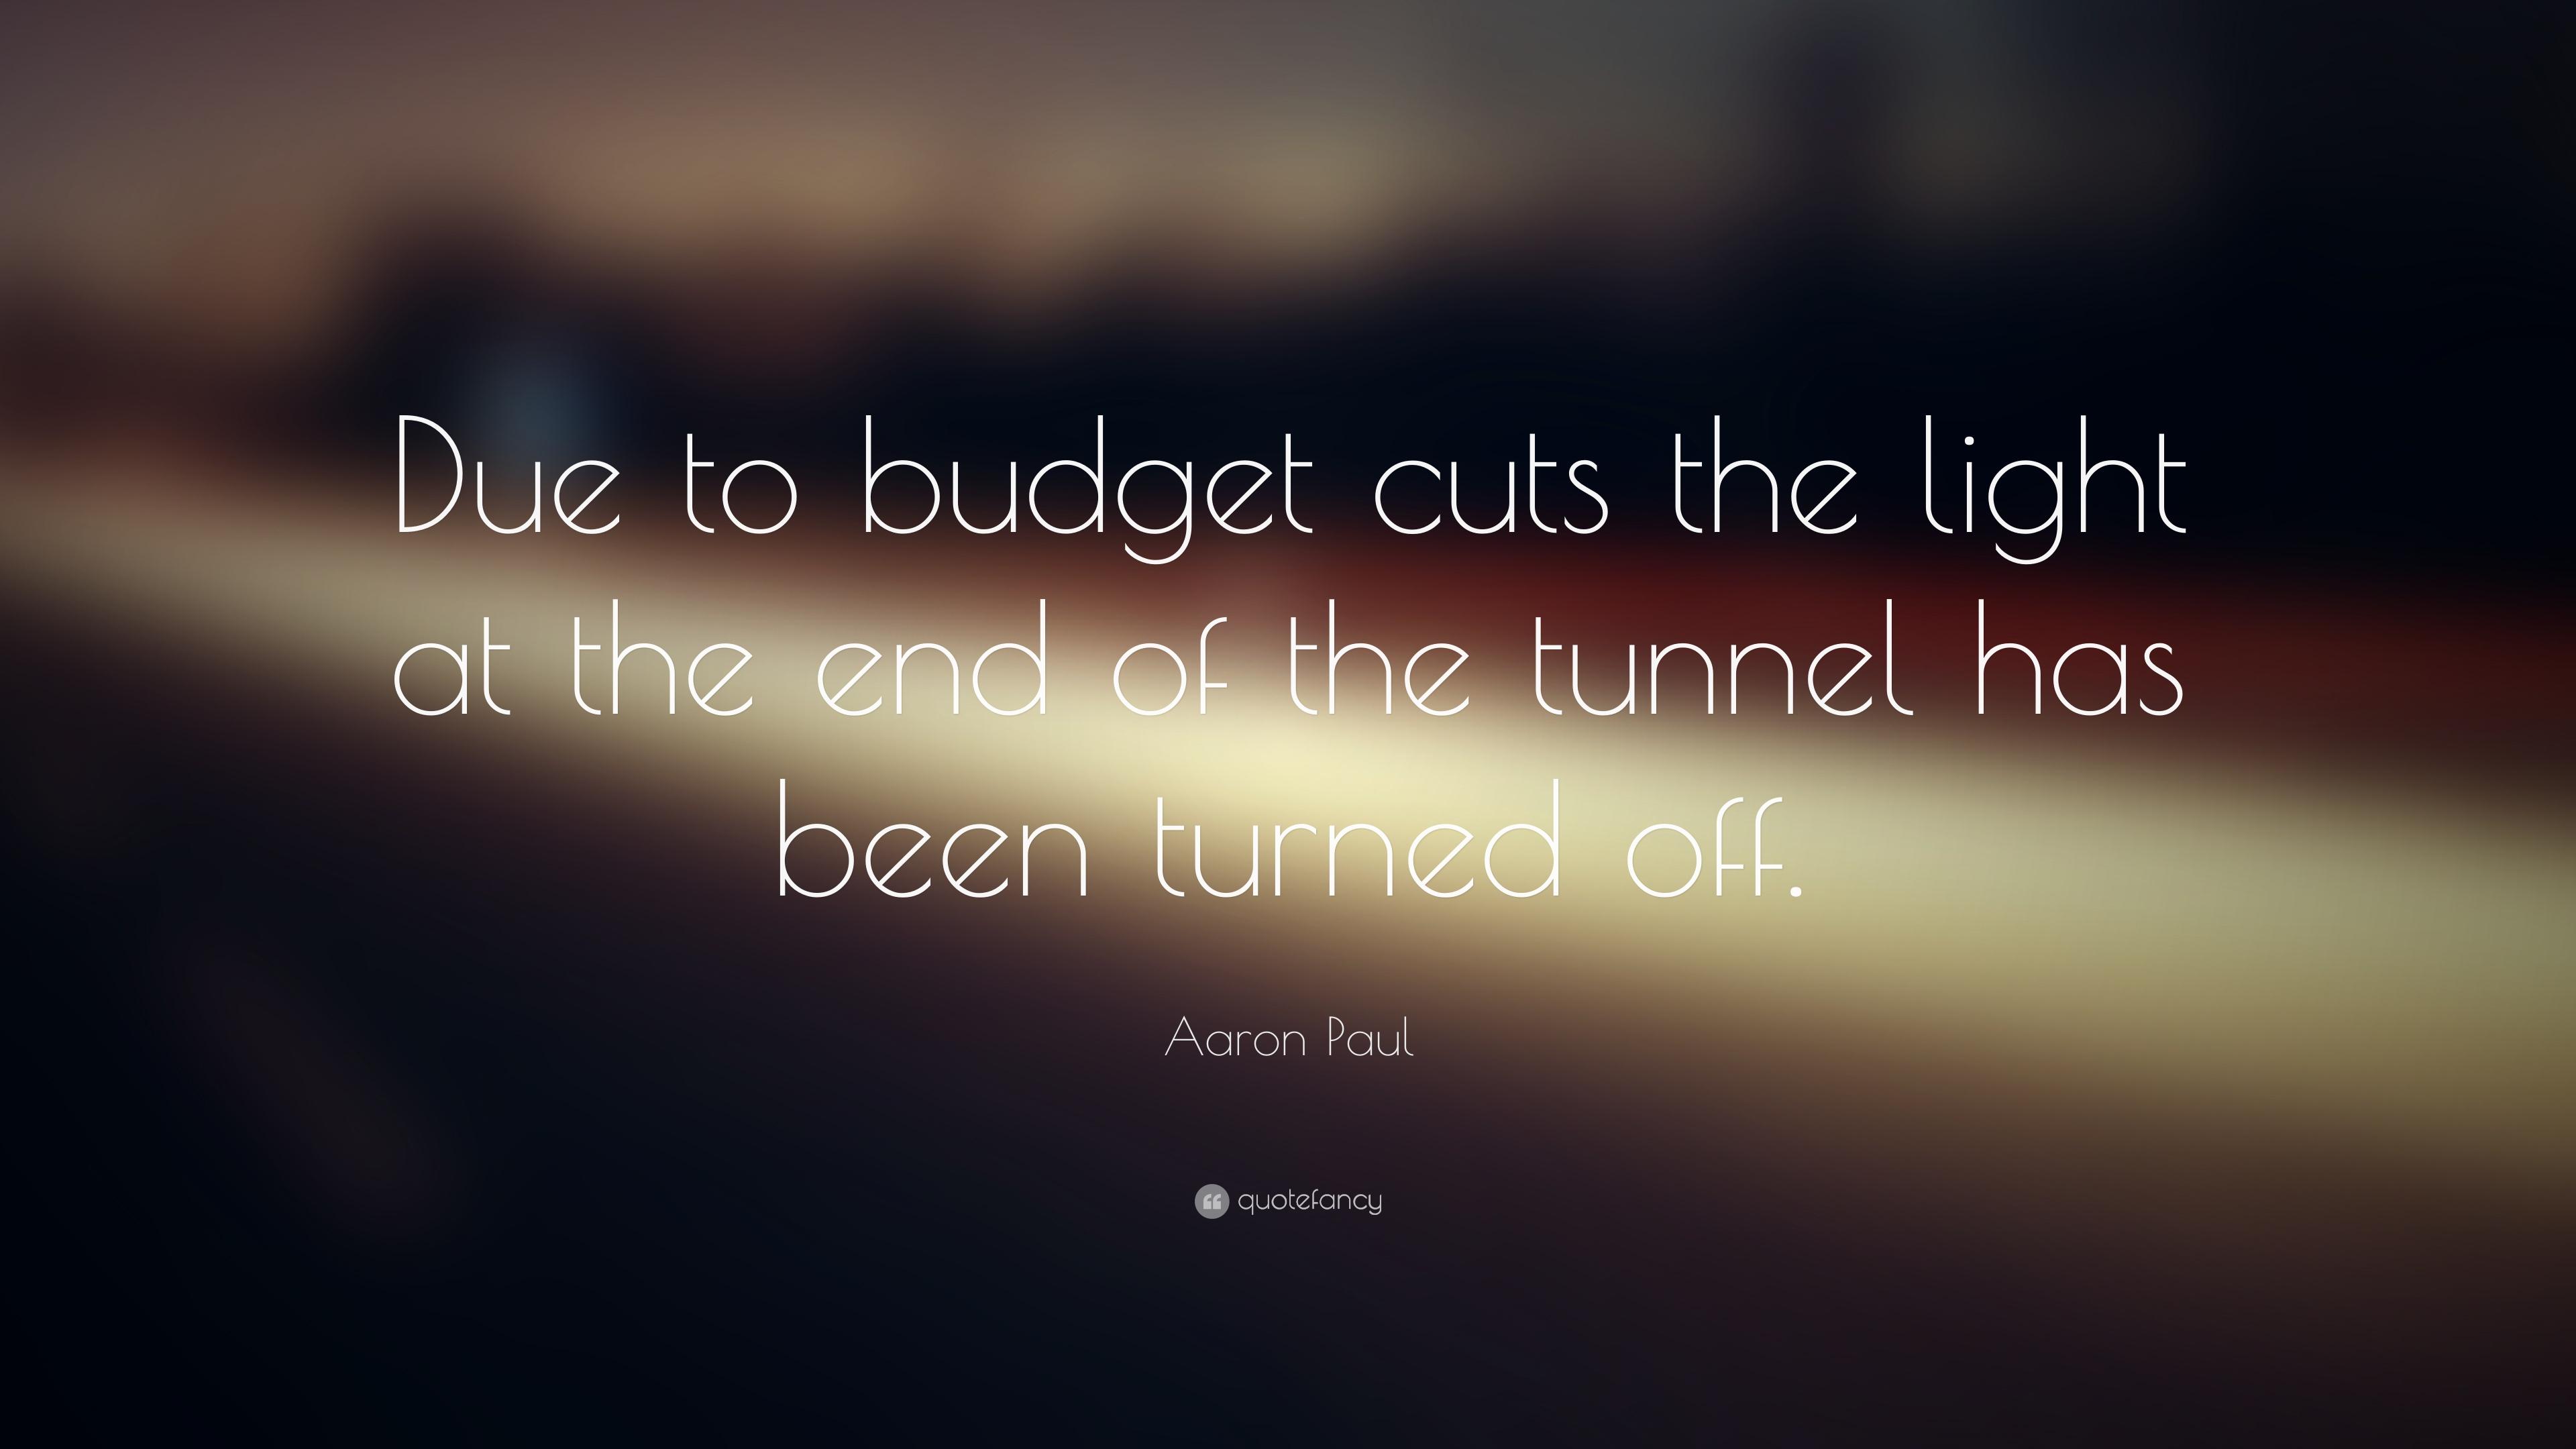 Aaron Paul Quote: “Due to budget cuts the light